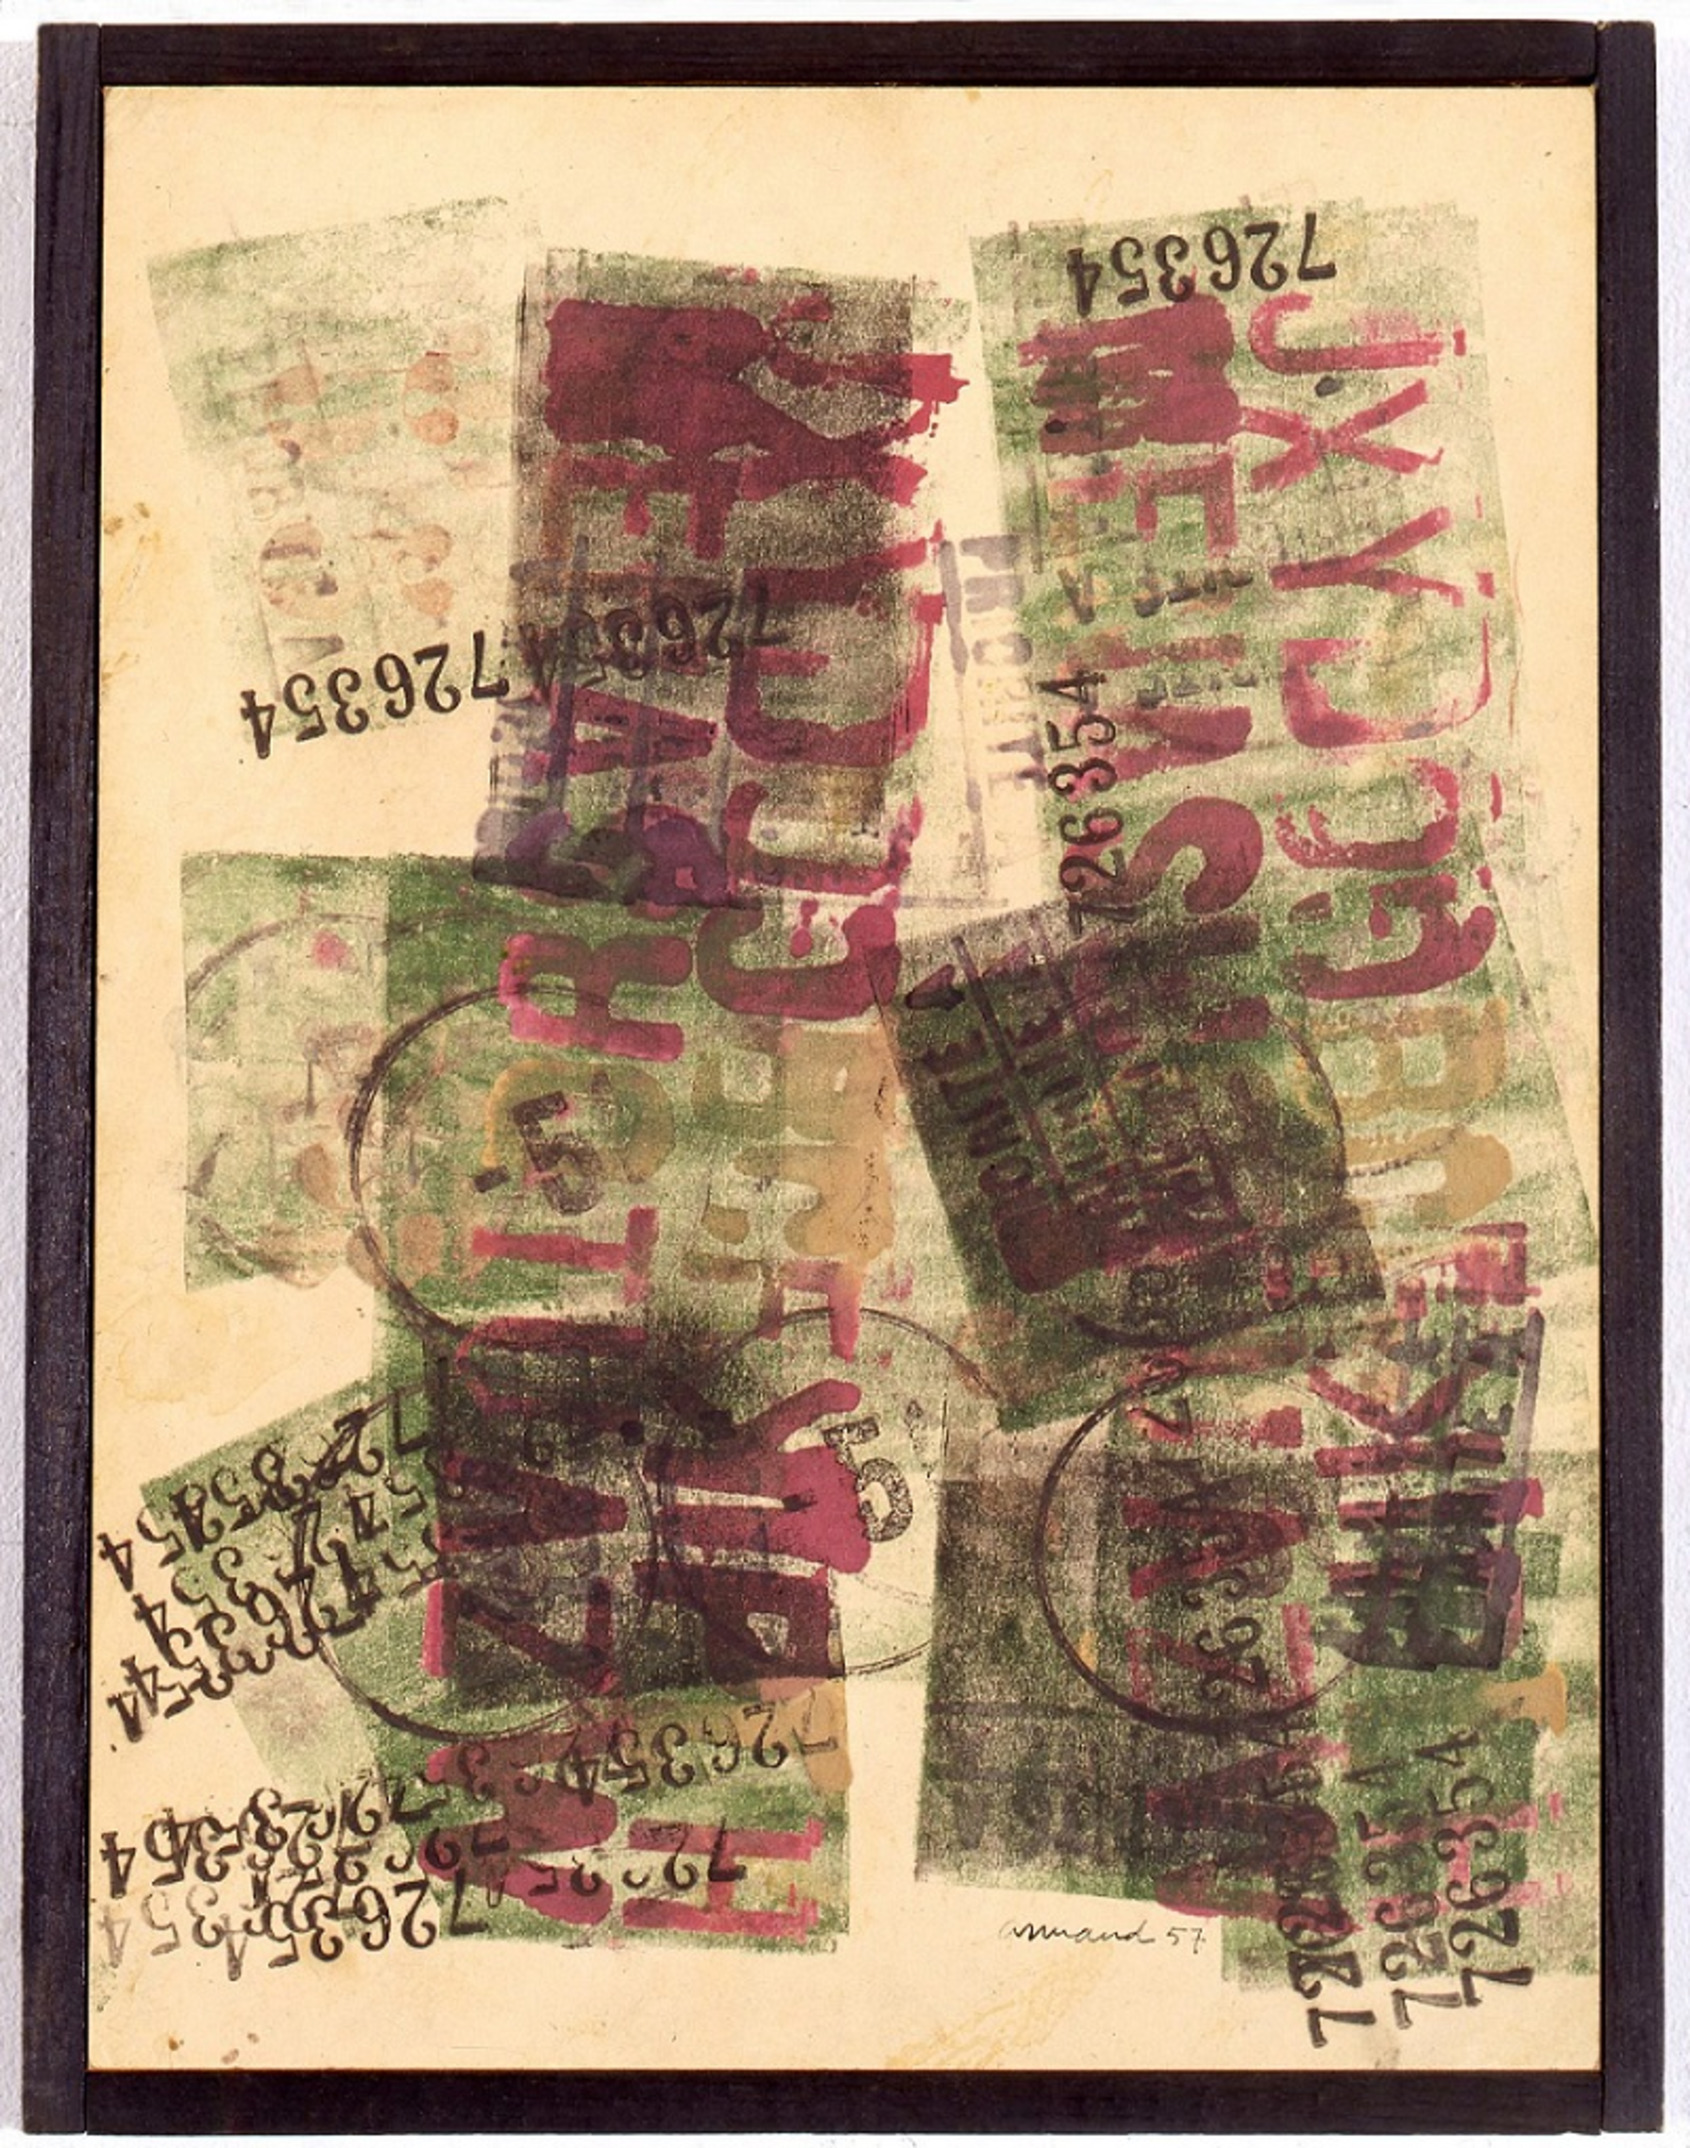 Priorite A, ARMAN, 1957, 32x24.5cm. Rubber stamps on paper. Courtesy of The Arman Marital Trust. 